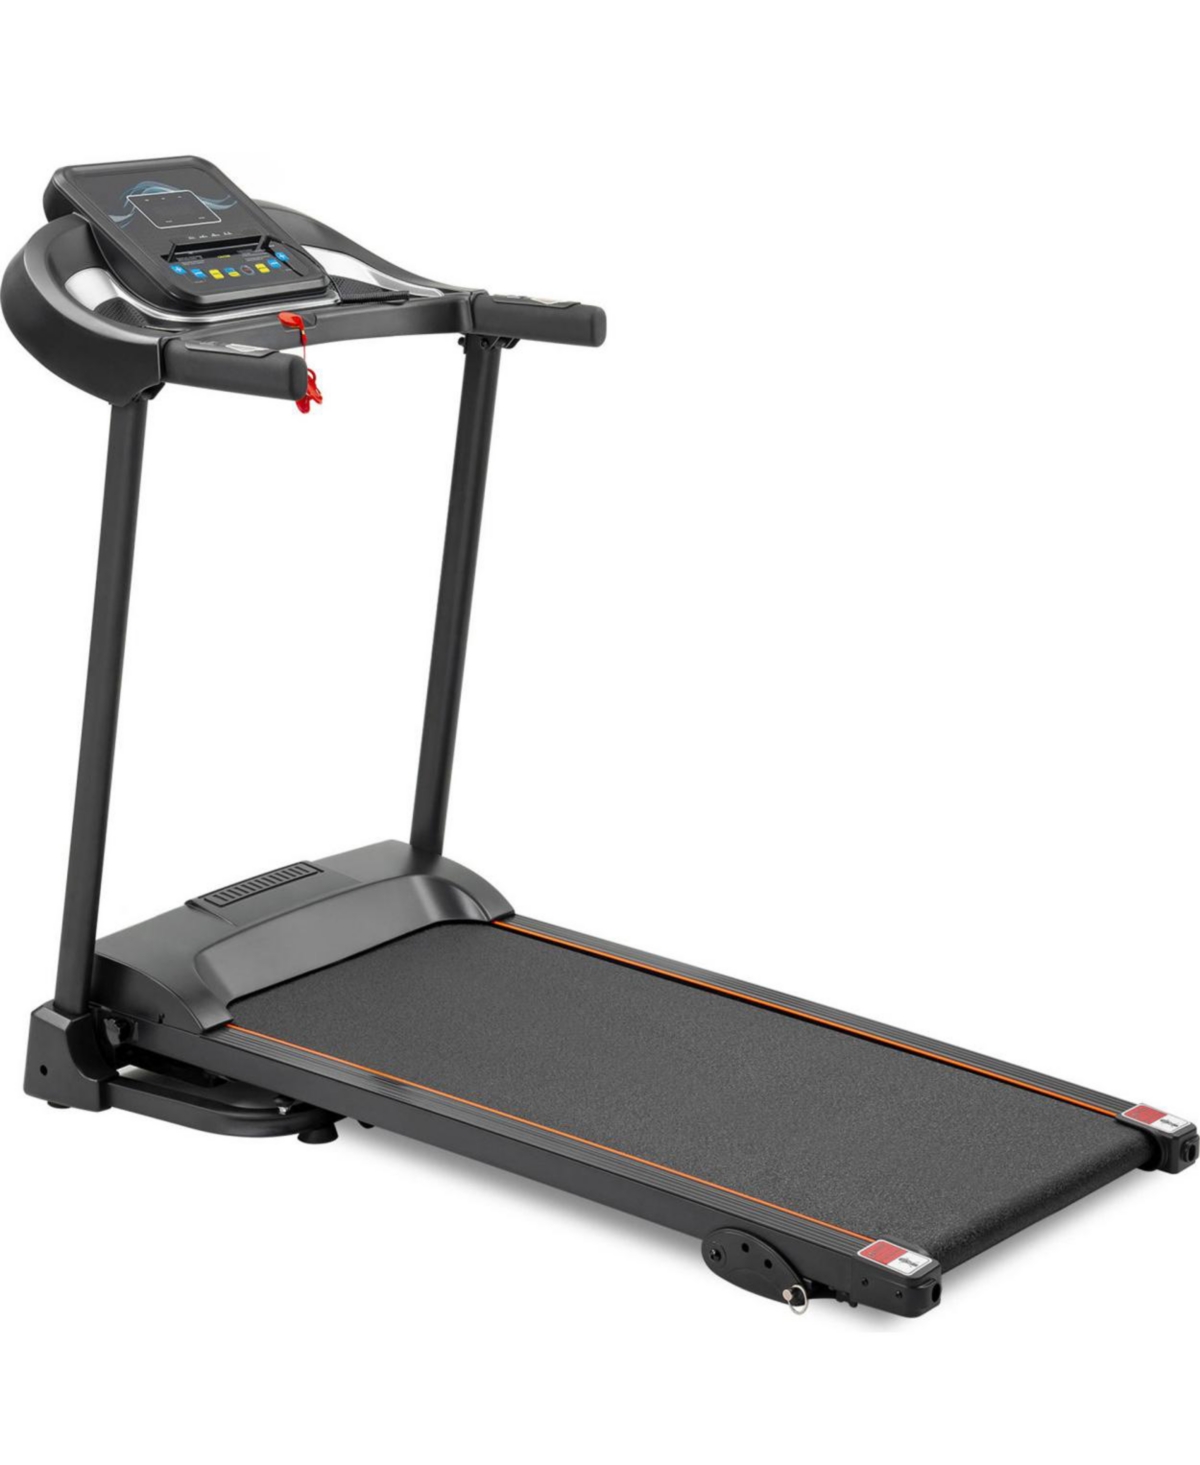 Compact Easy Folding Treadmill Motorized Running Jogging Machine With Audio Speakers - Black